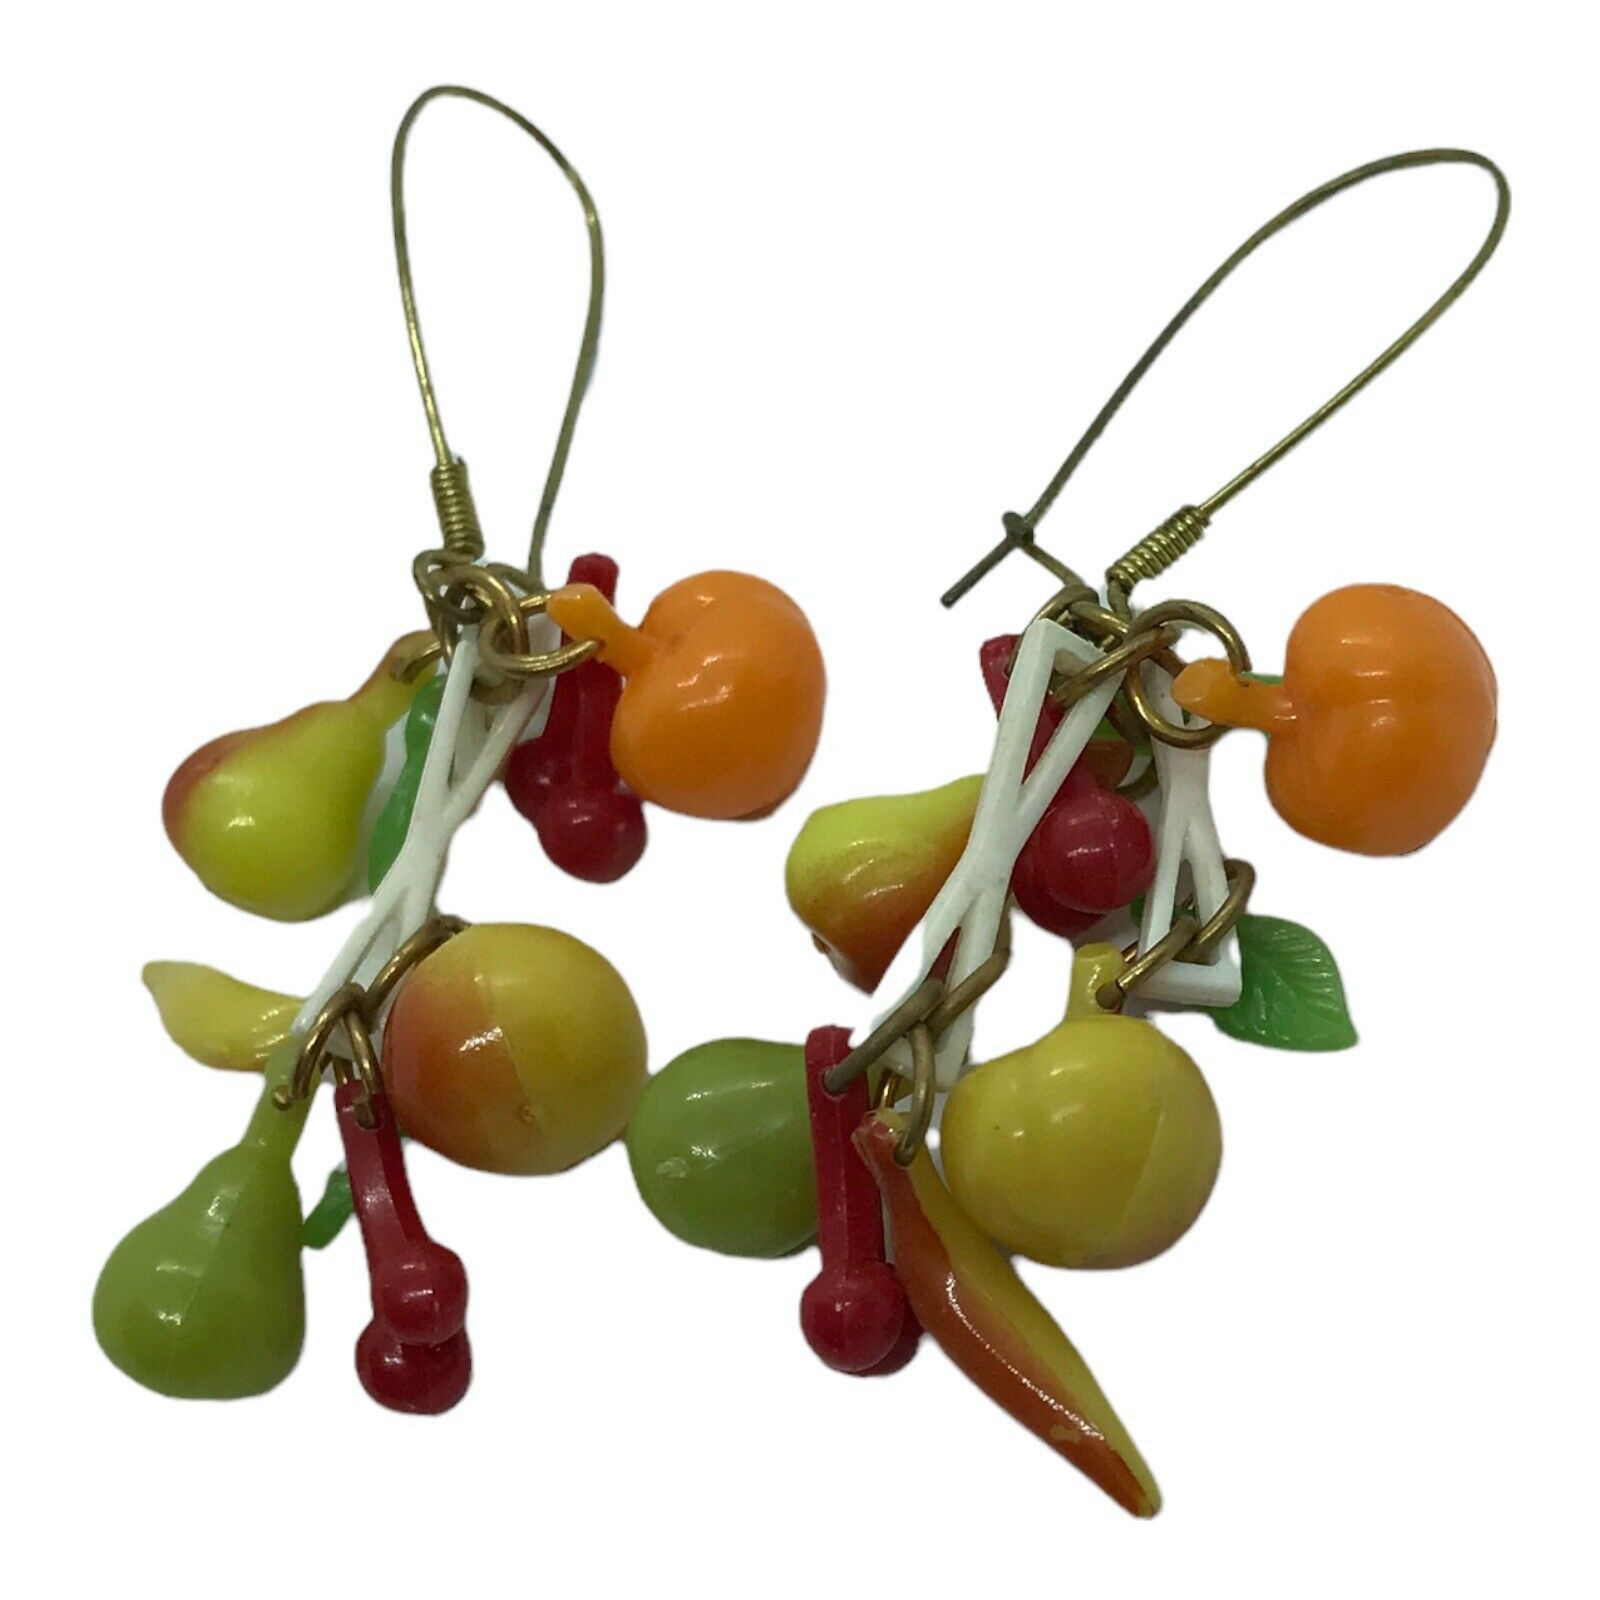 Primary image for Vintage Fruit Plastic Pierced Earrings kitsch lightweight colorful cherry orange